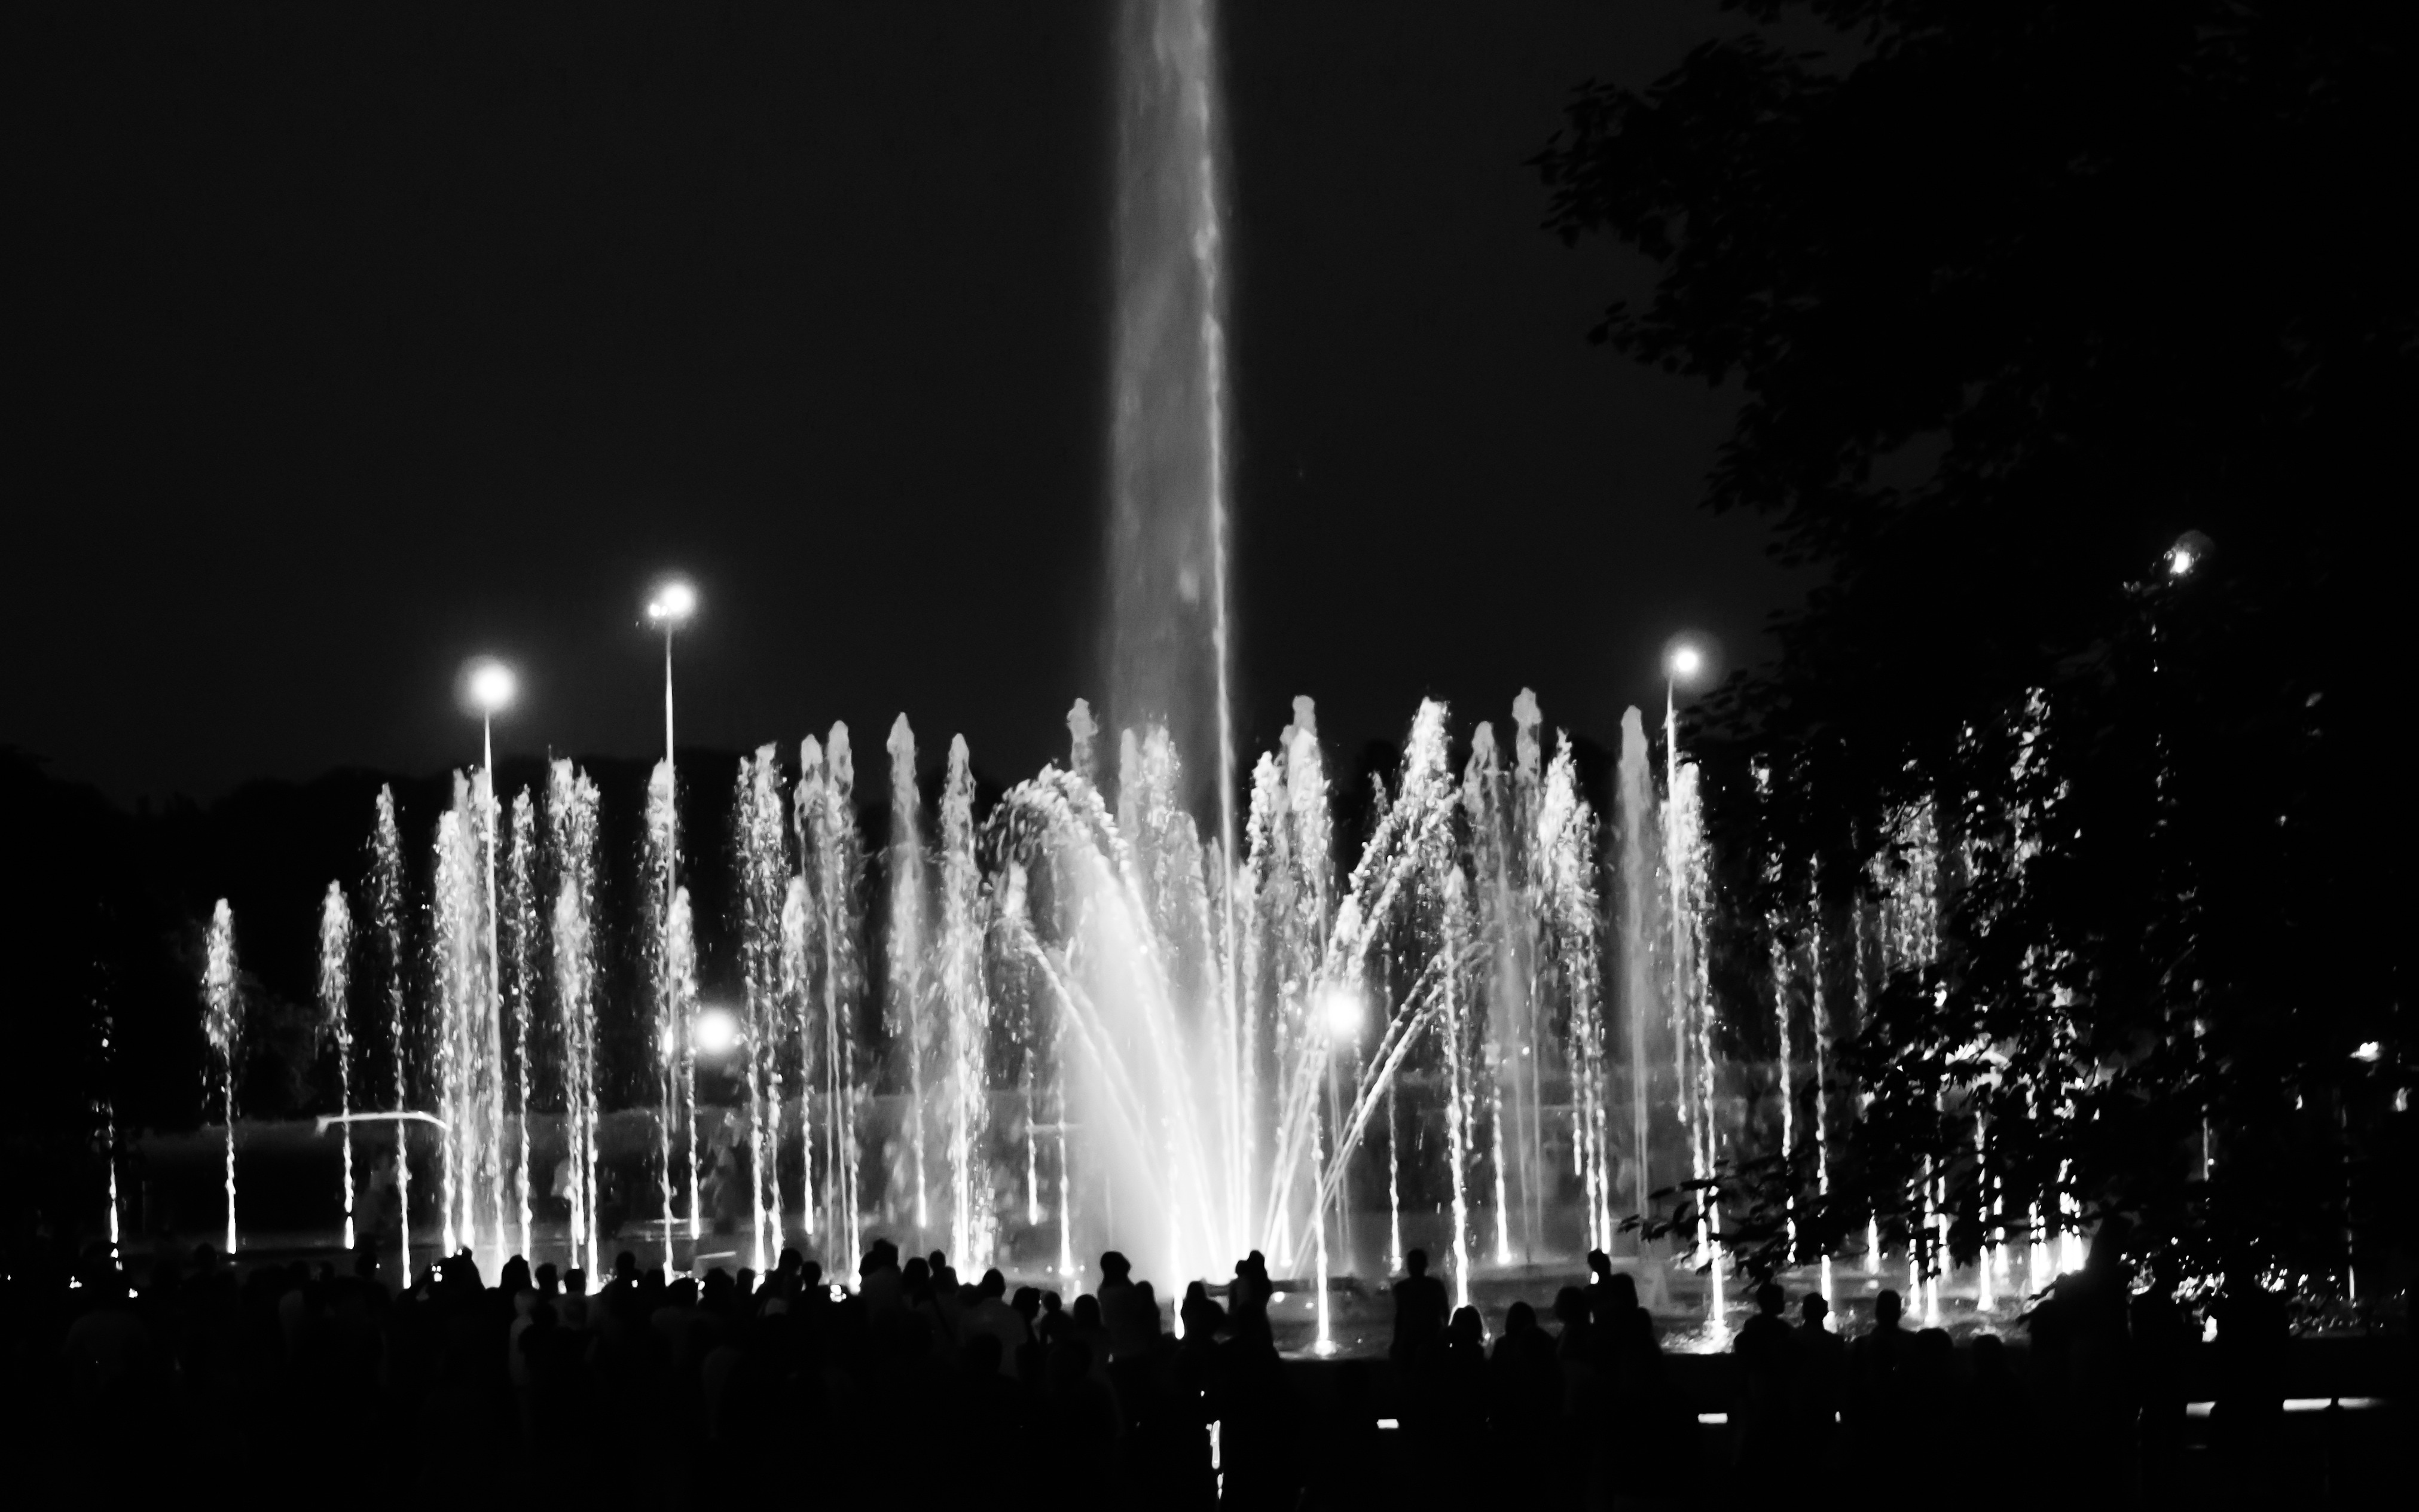 fountain grayscale photo during nighttime